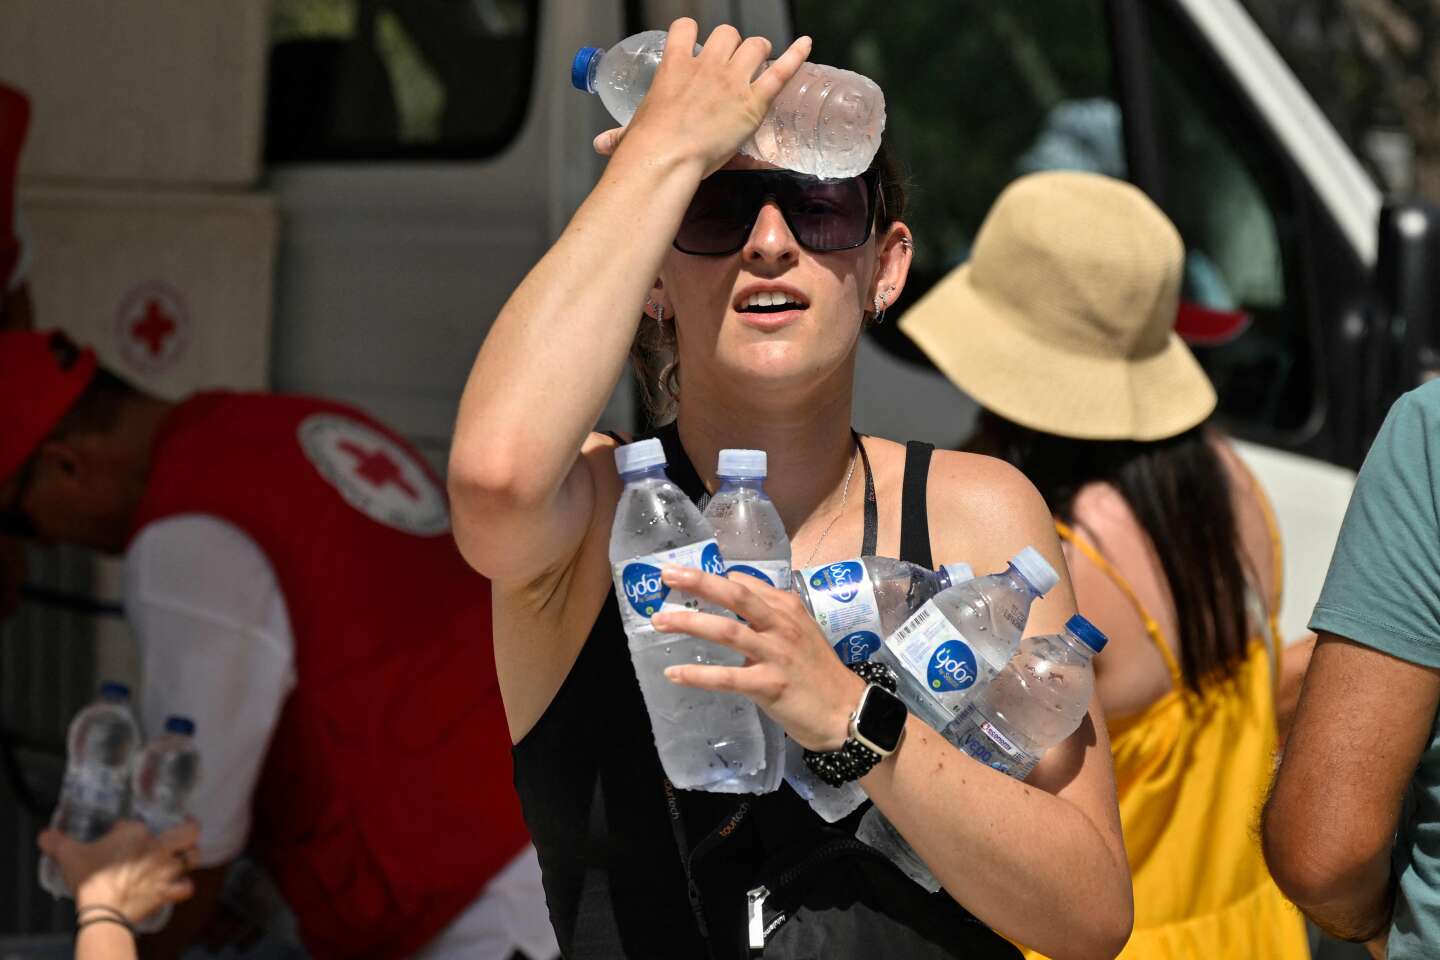 Greece is facing the longest and most intense heat wave in its history